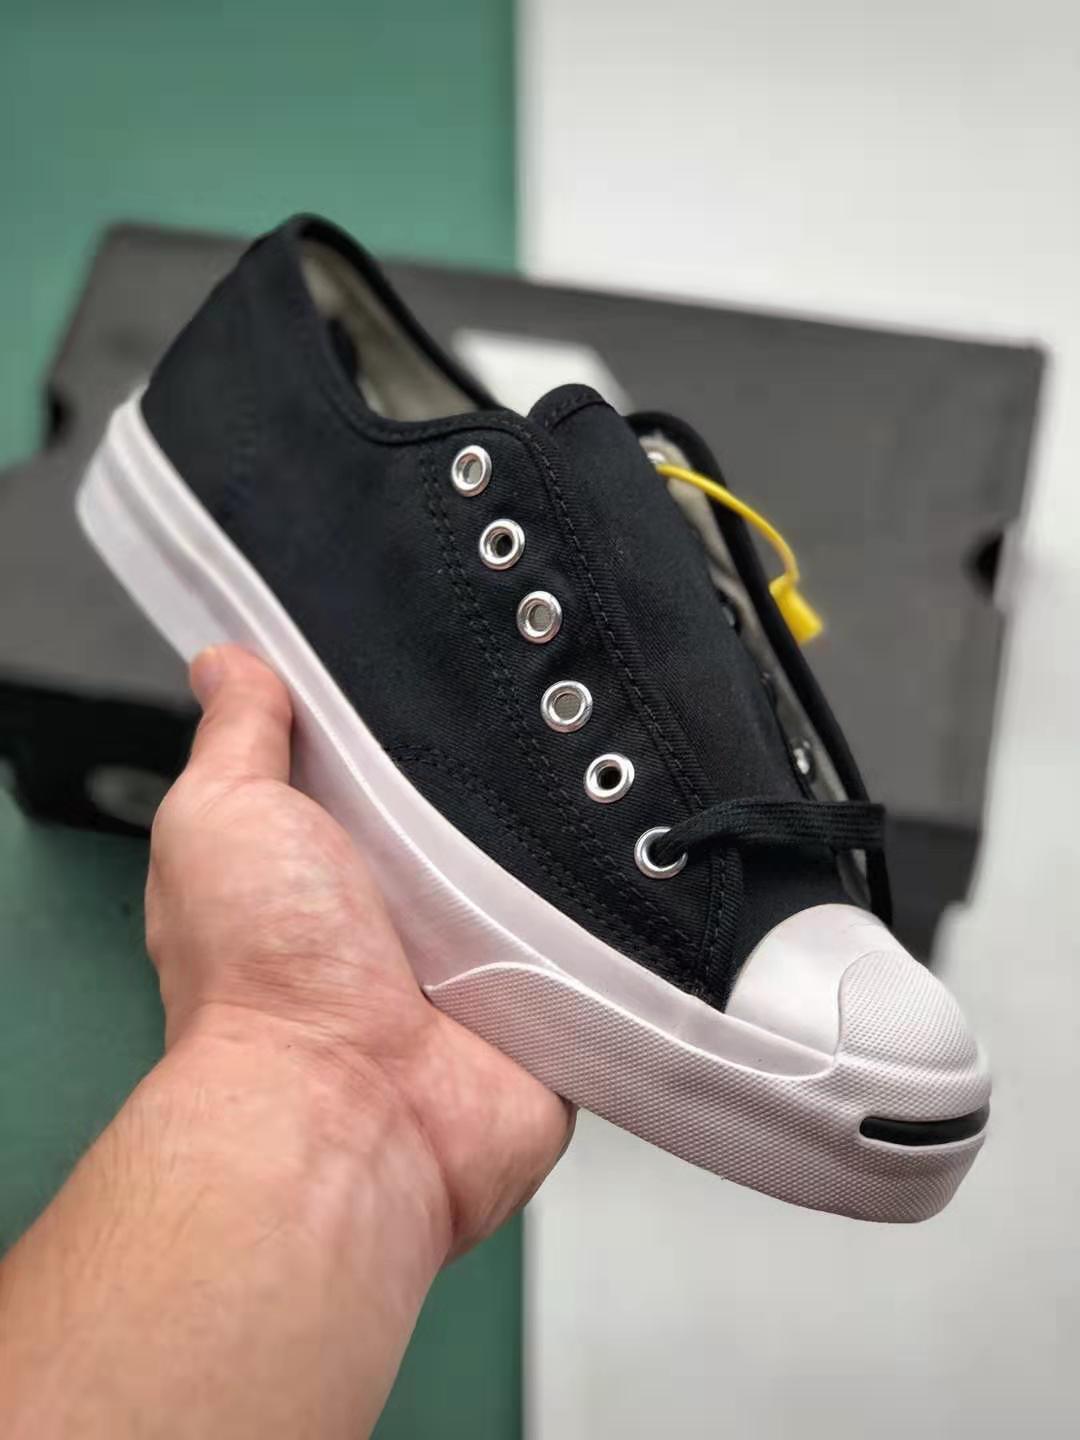 Converse Jack Purcell Black - Classic Style for Every Occasion